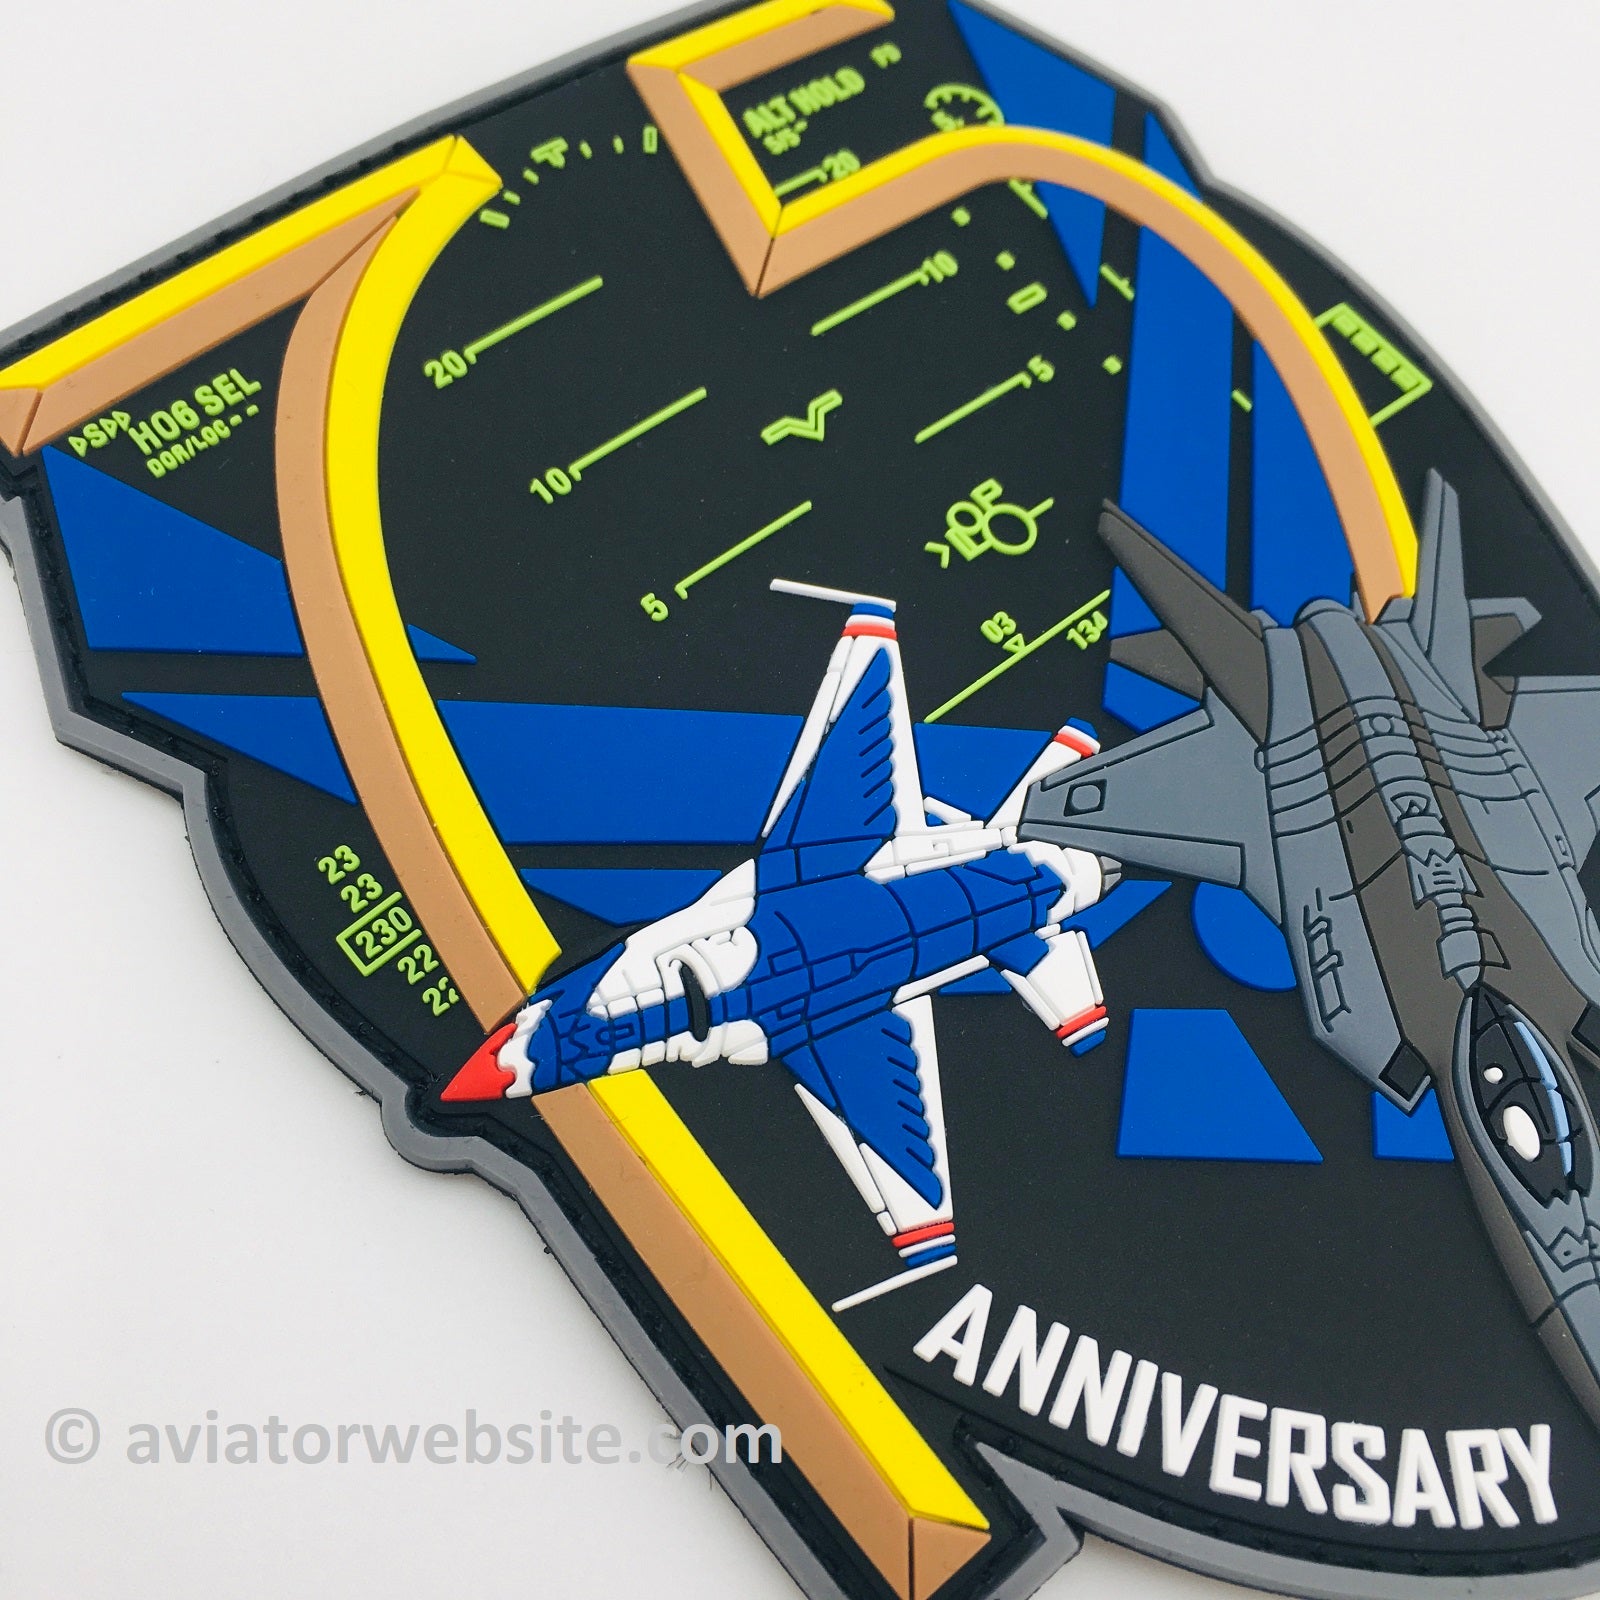 ITS Tactical 5 year anniversary patch